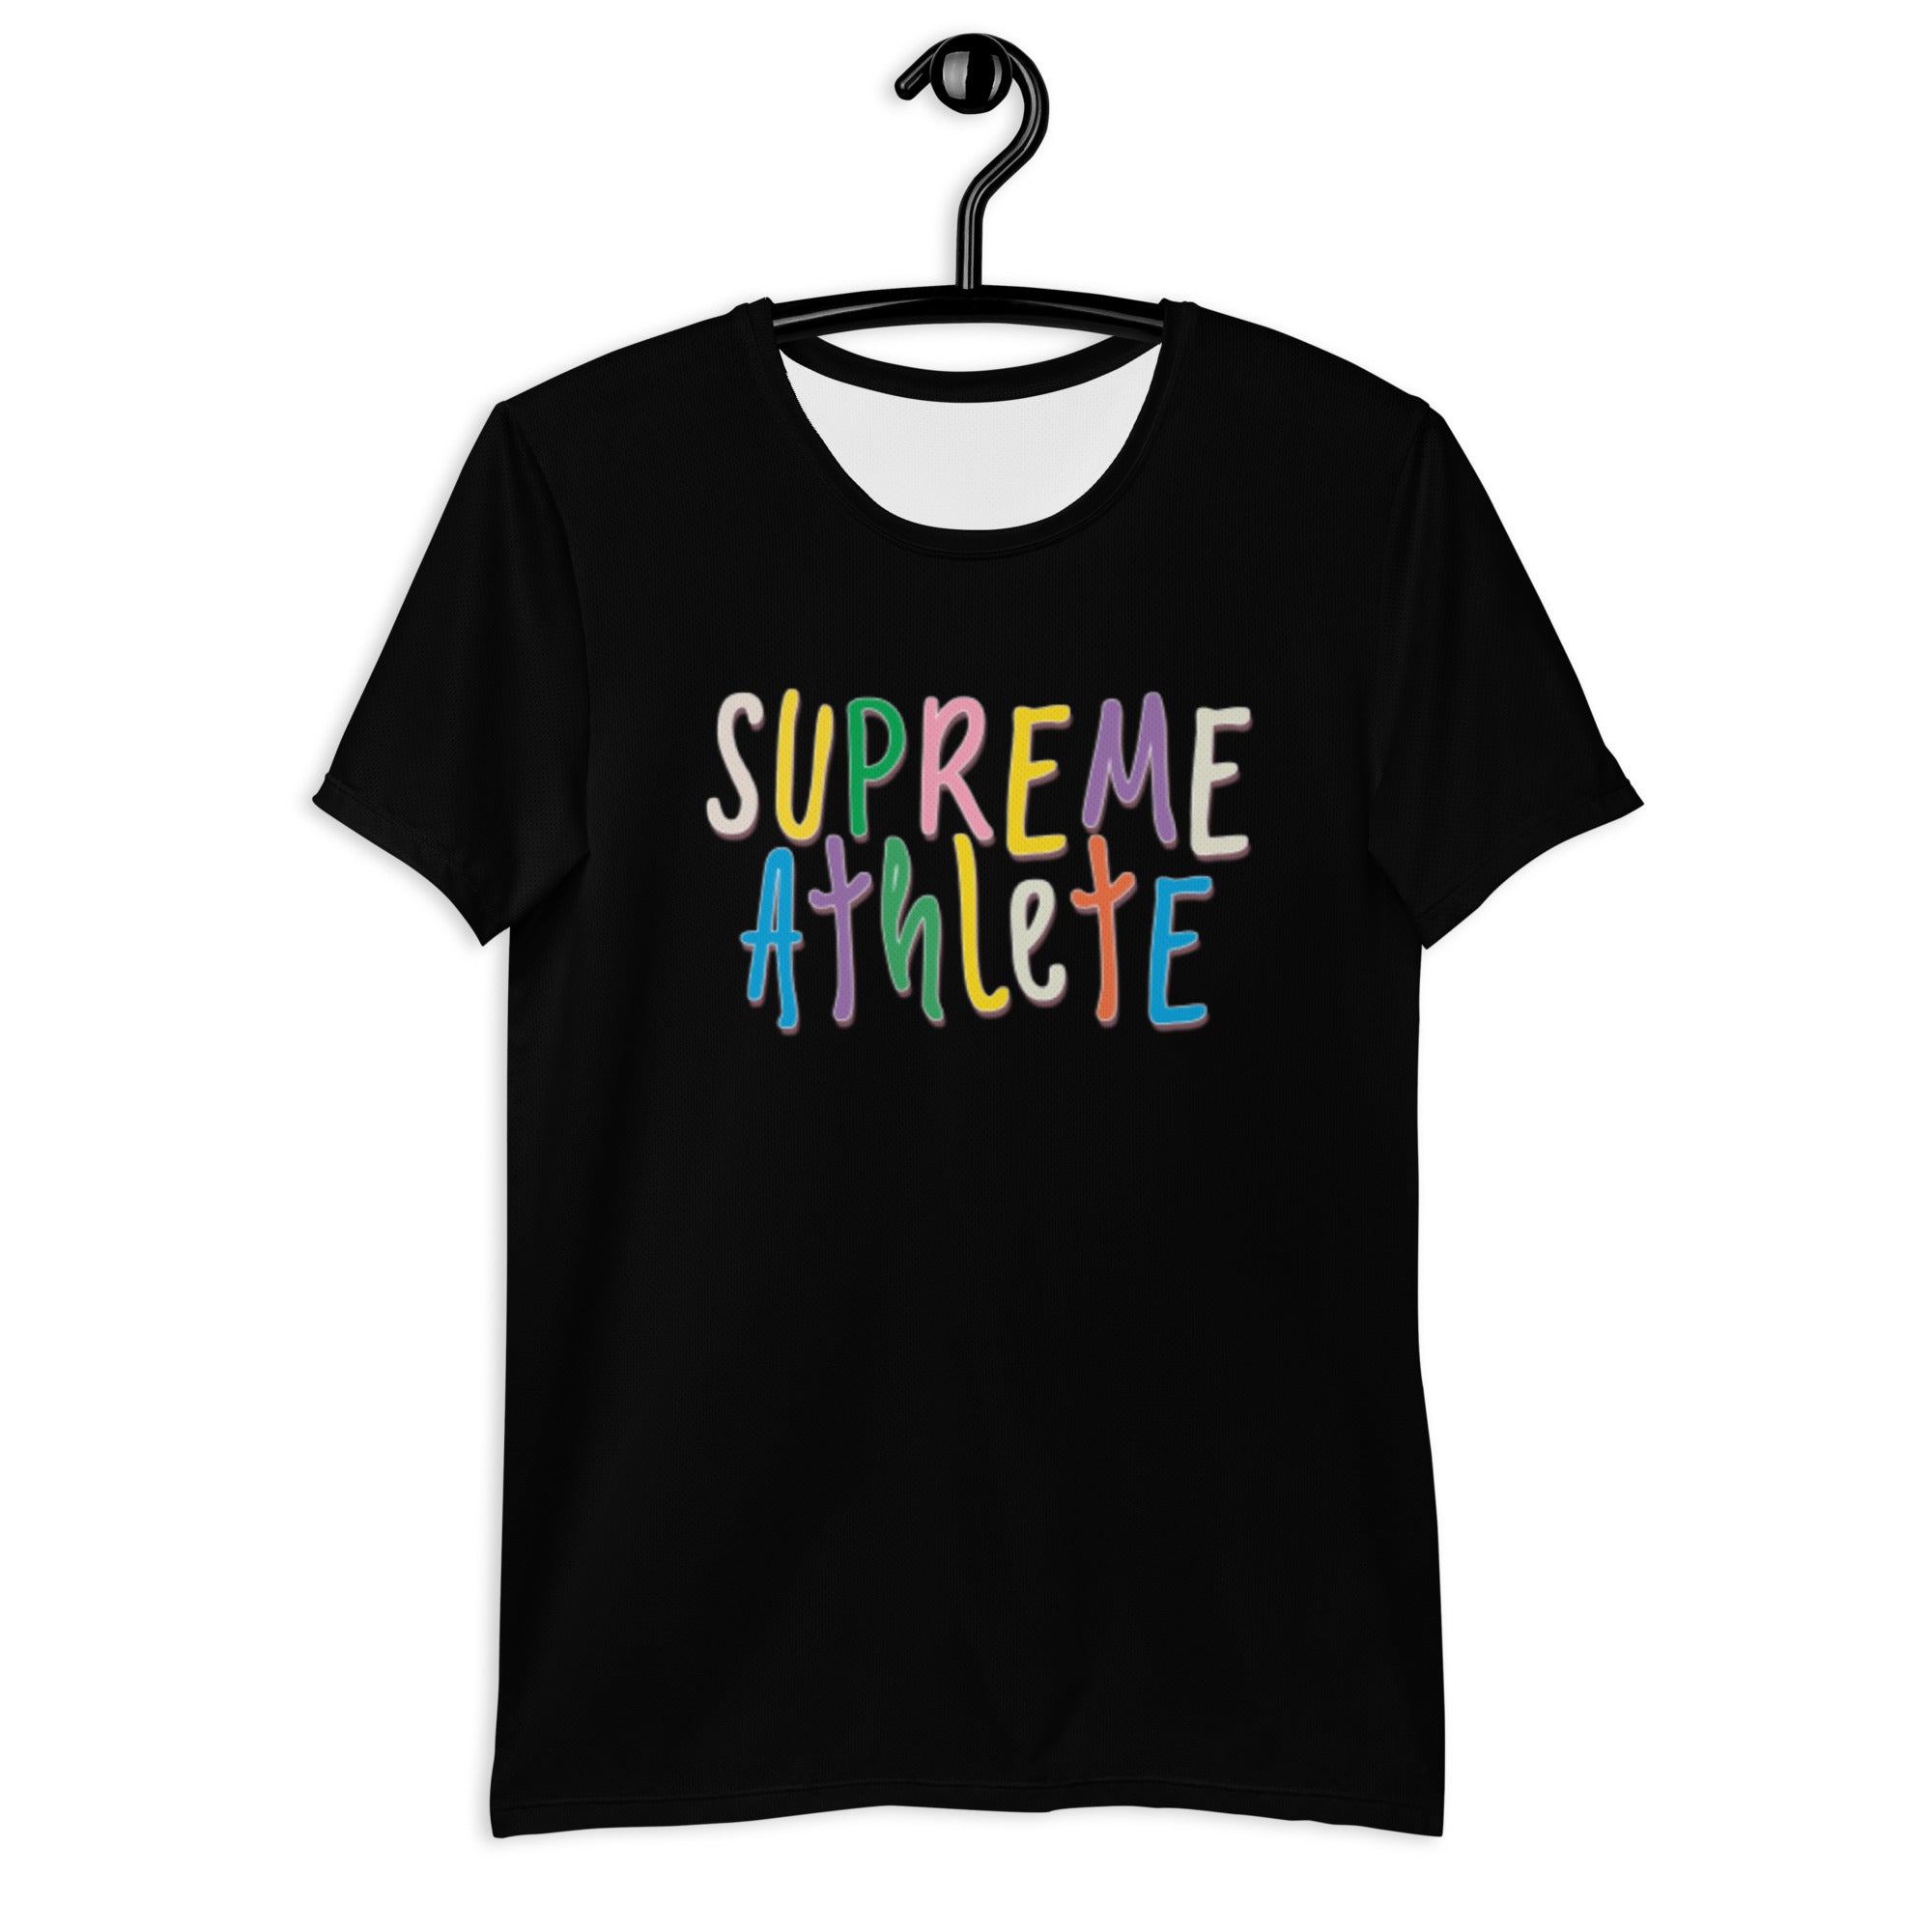 "Almighty" Men's Athletic T-shirt Supreme Athlete XS 